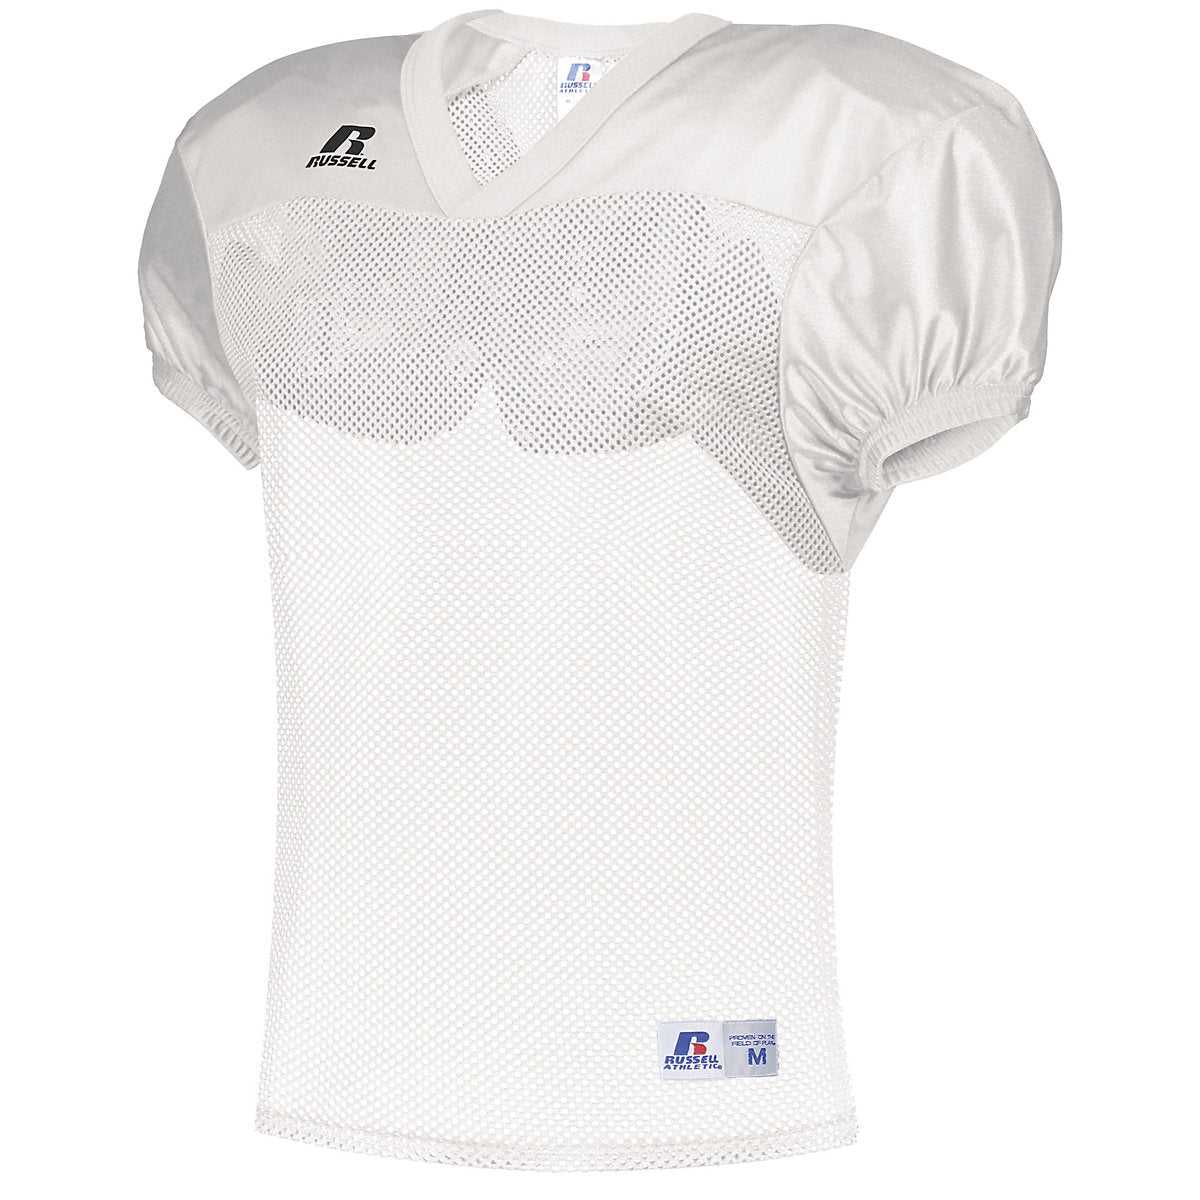 Russell S096BM Stock Practice Jersey - White - HIT a Double